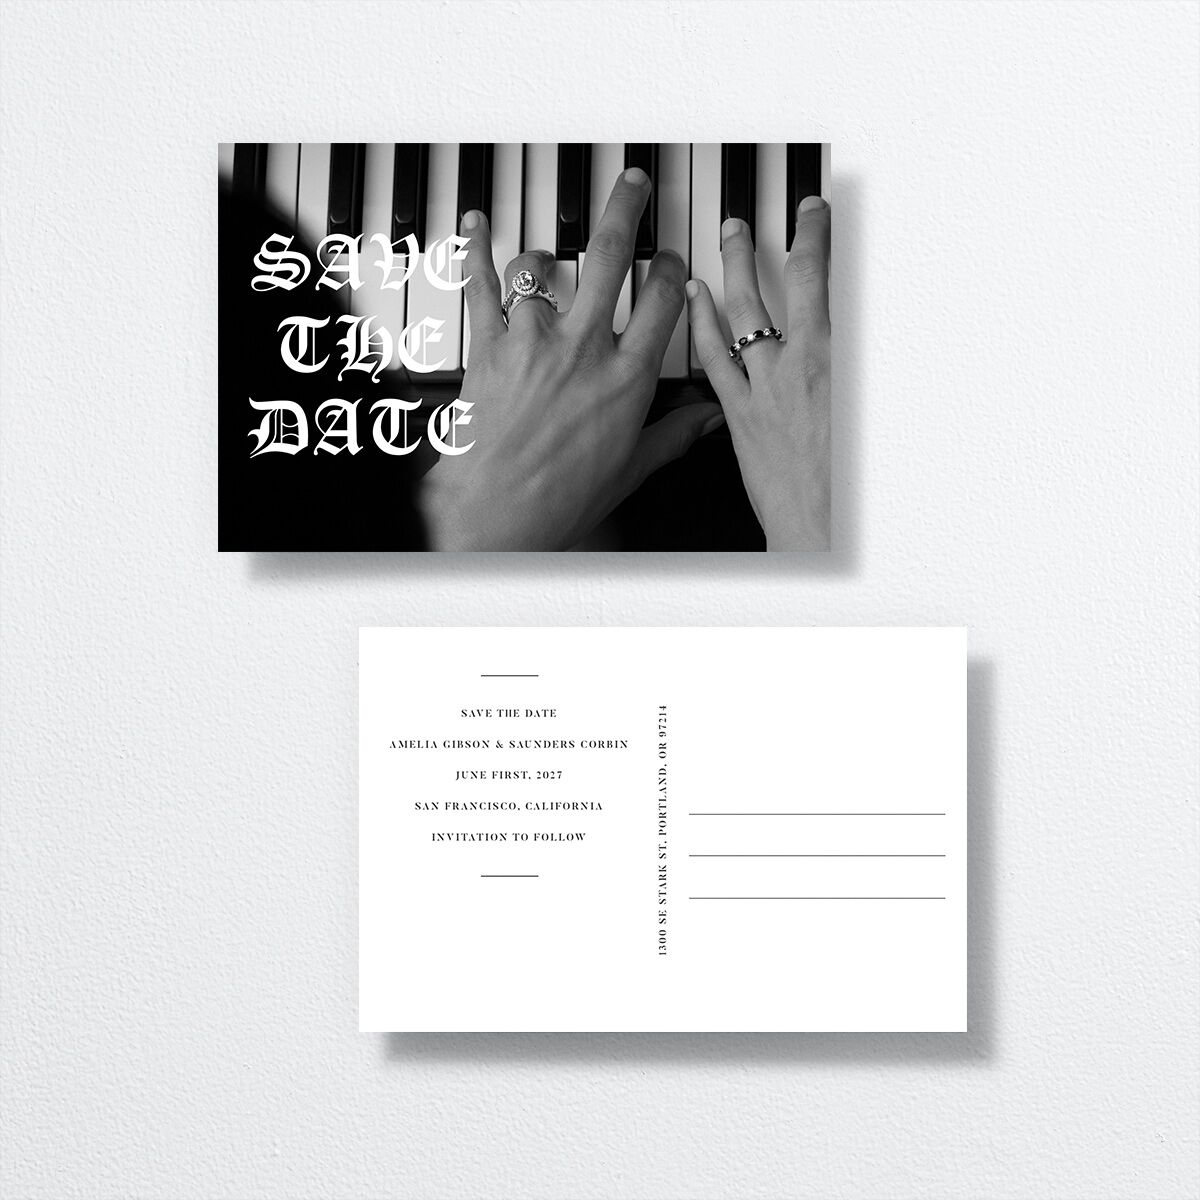 I Do Save The Date Postcards by Vera Wang front-and-back in white